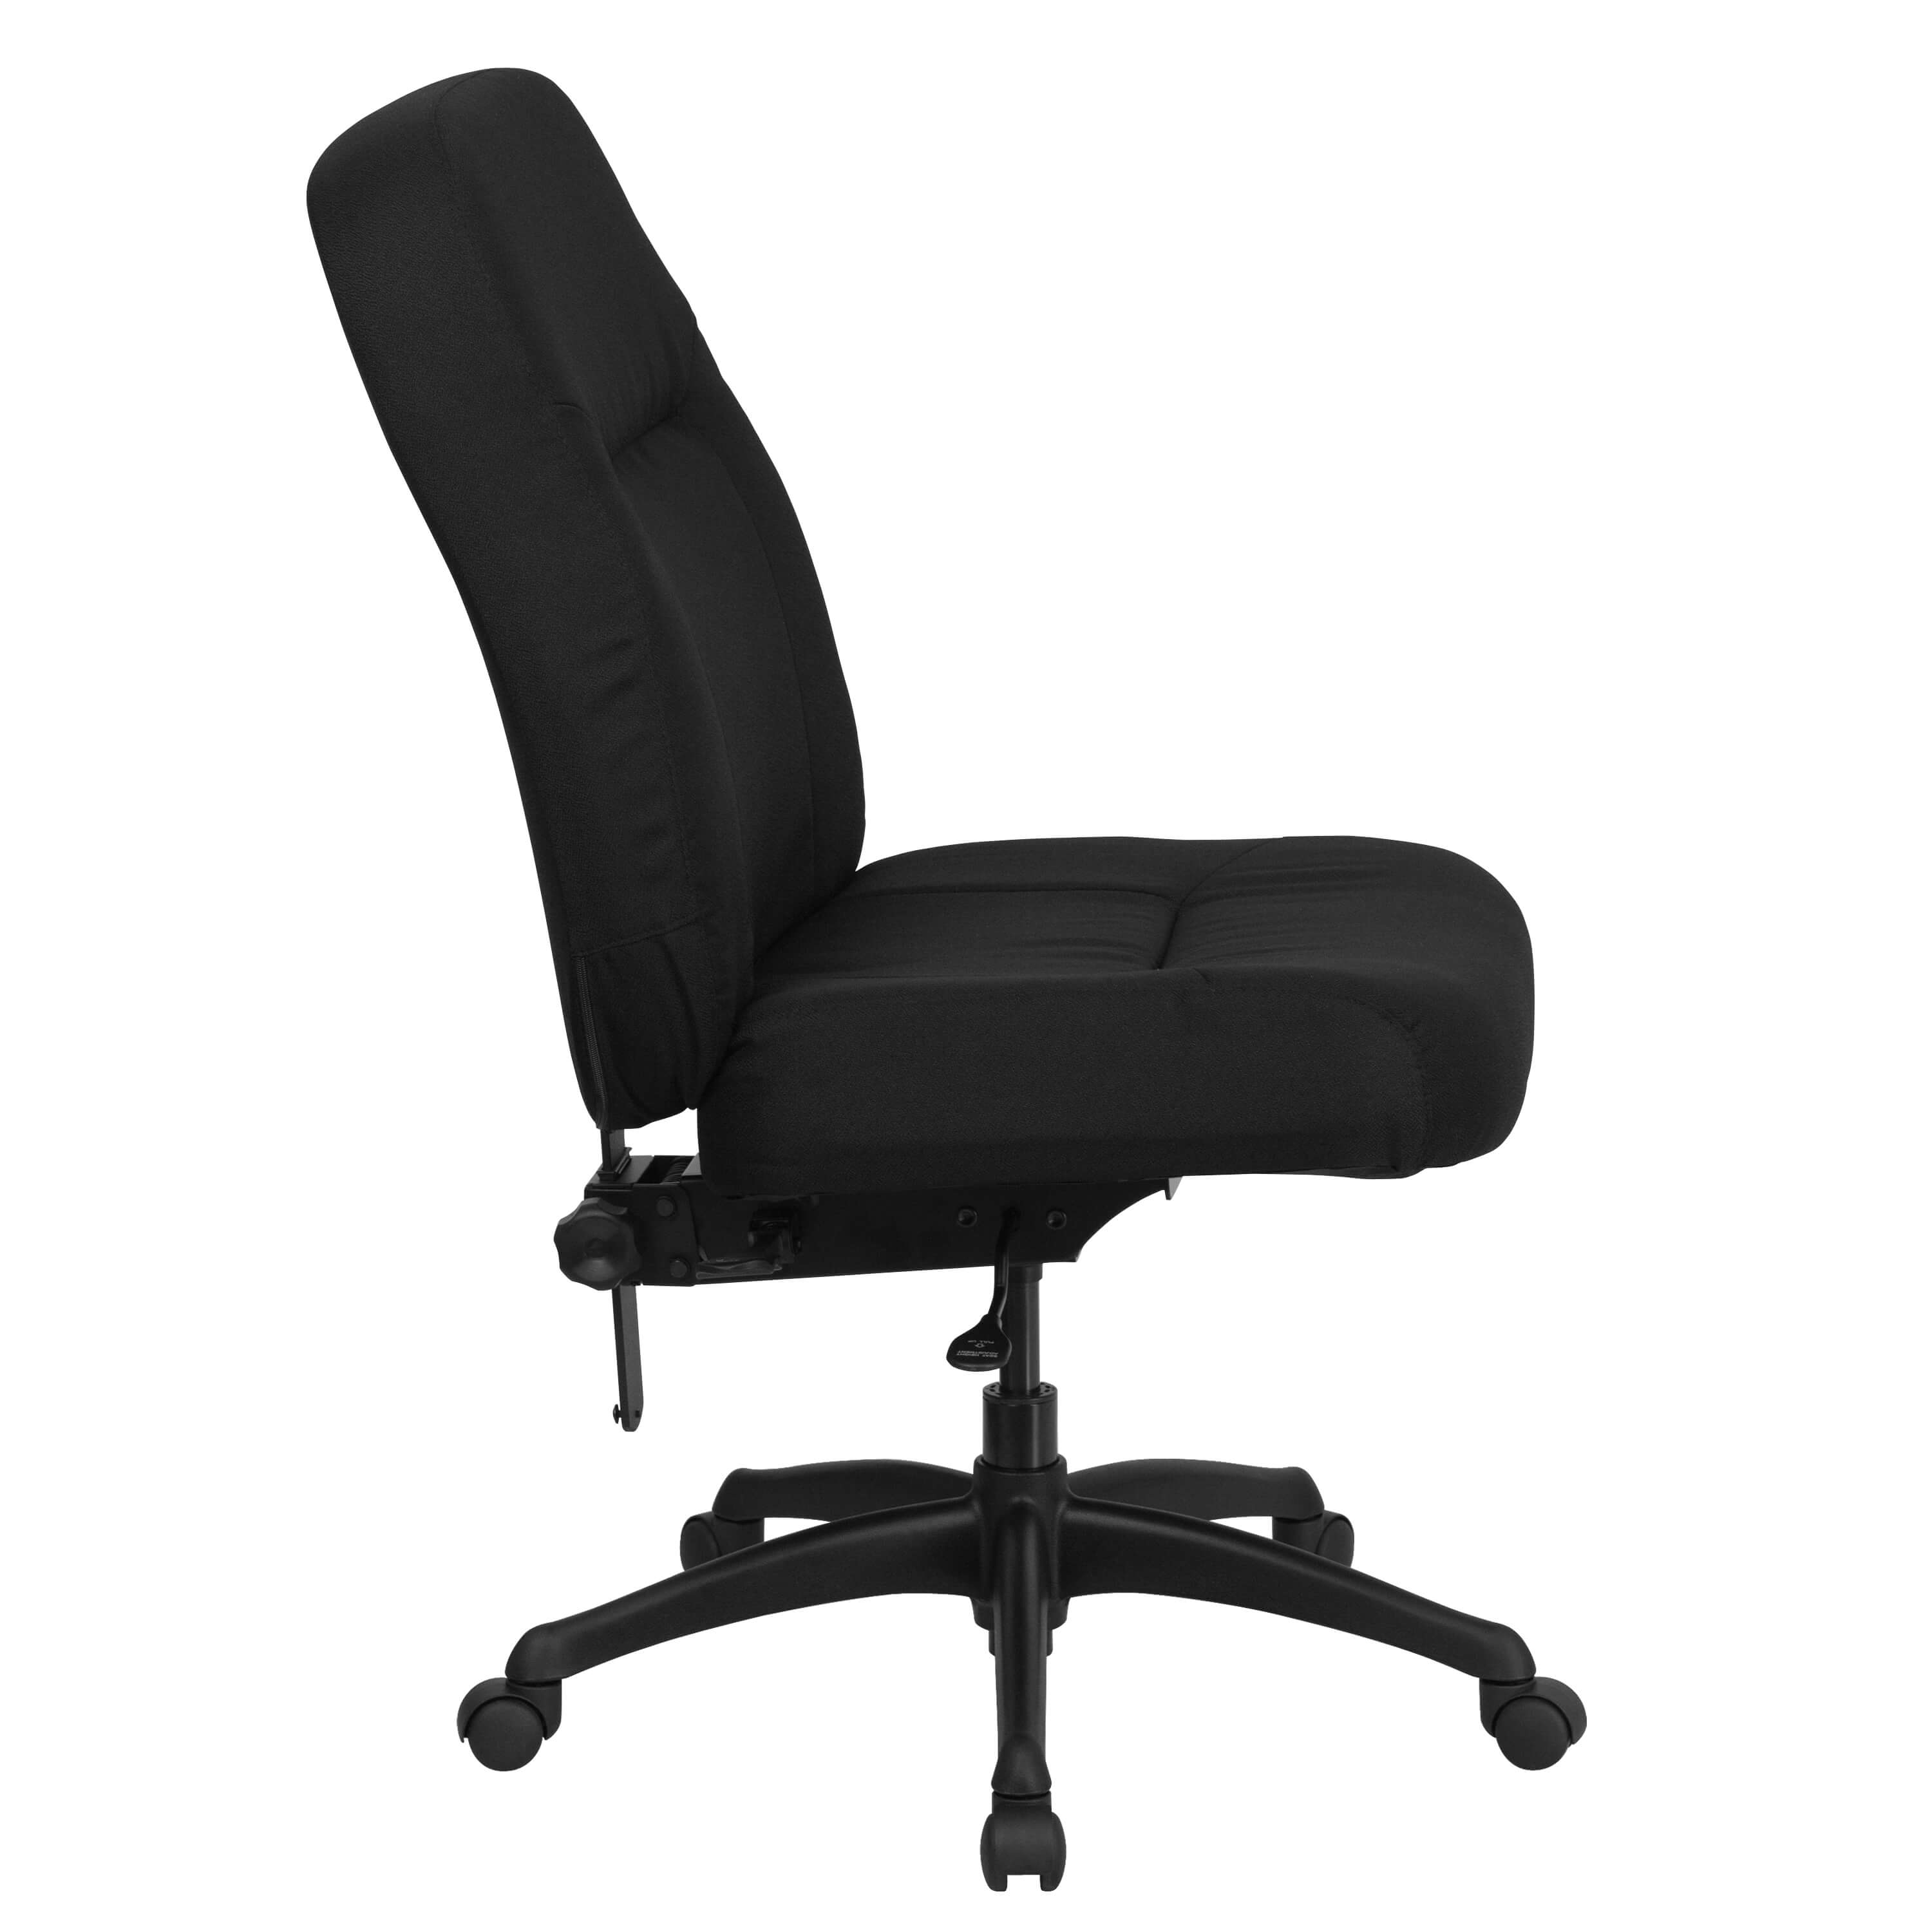 400 lb capacity office chair side view